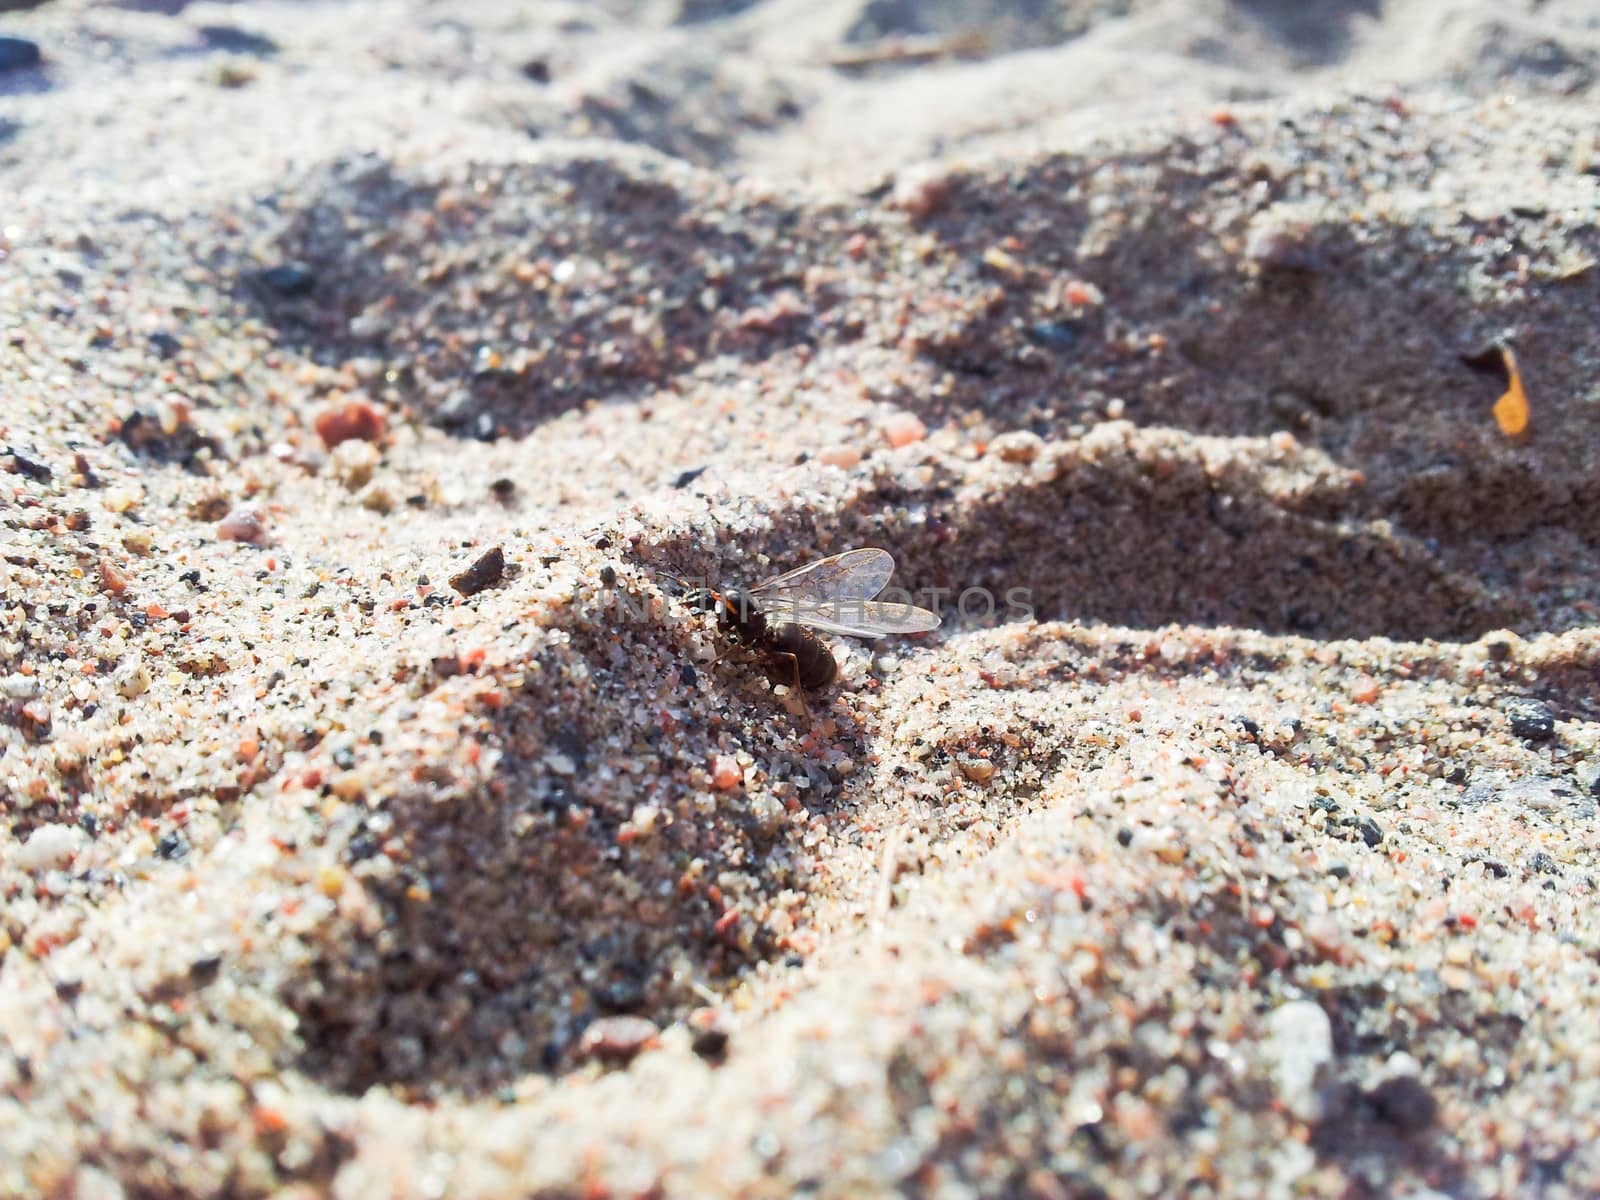 Fly ant in sand by Arvebettum